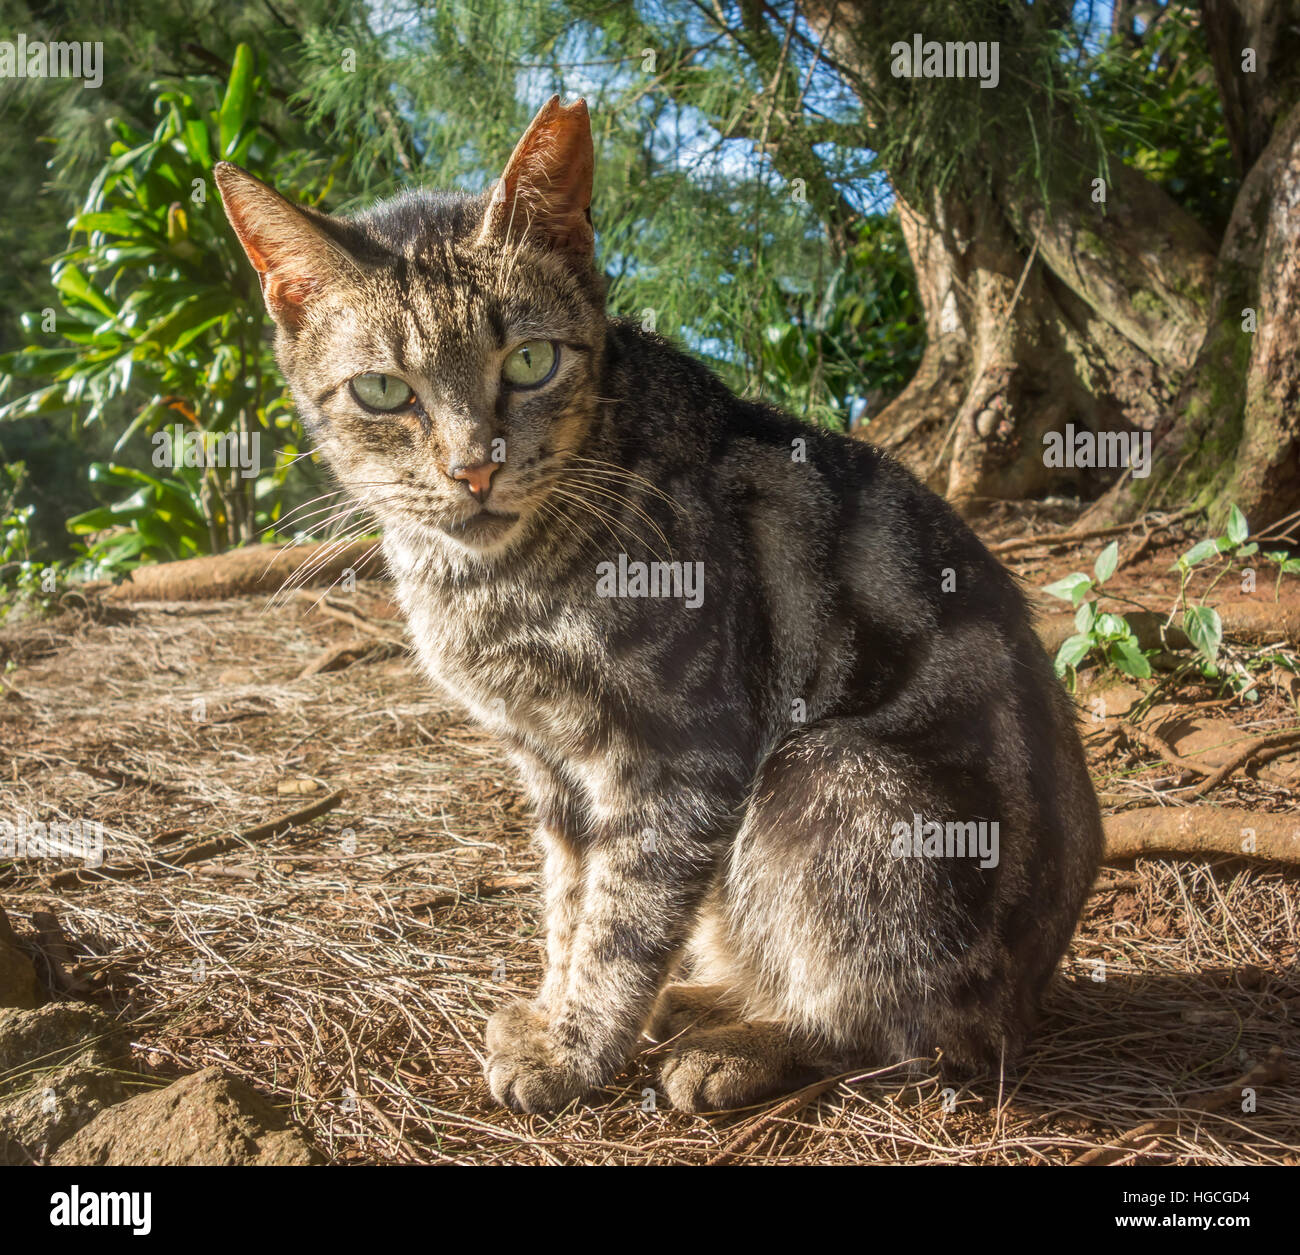 A stern gaze from a feral brown cat with tipped ear, indicating that it has been sterilized (spayed or neutered). Stock Photo